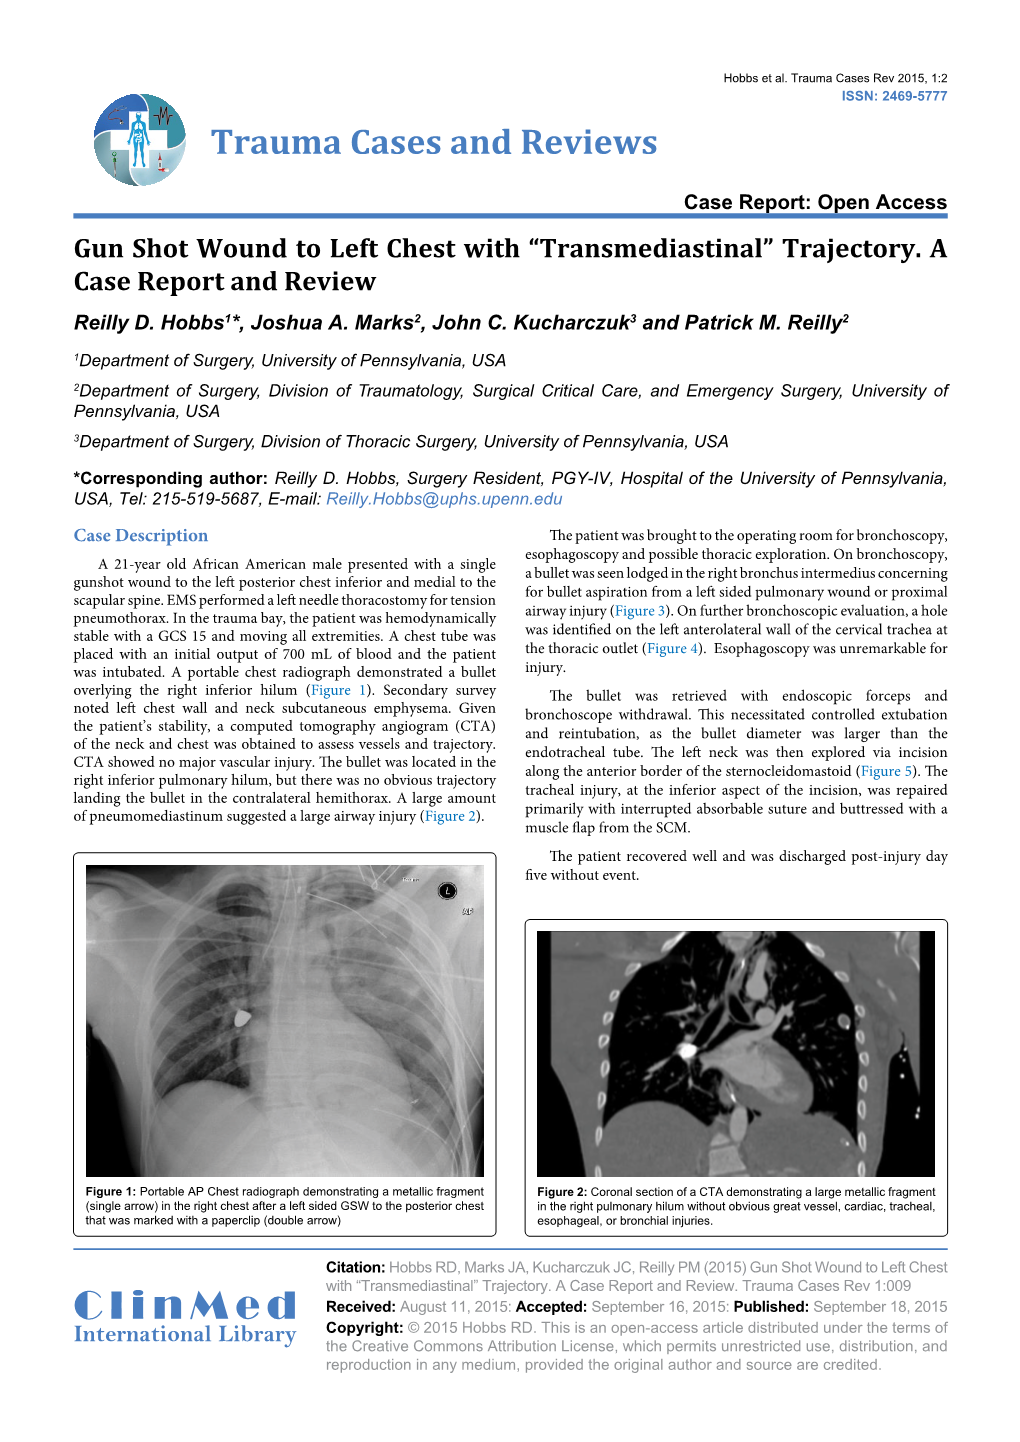 Gun Shot Wound to Left Chest with “Transmediastinal” Trajectory